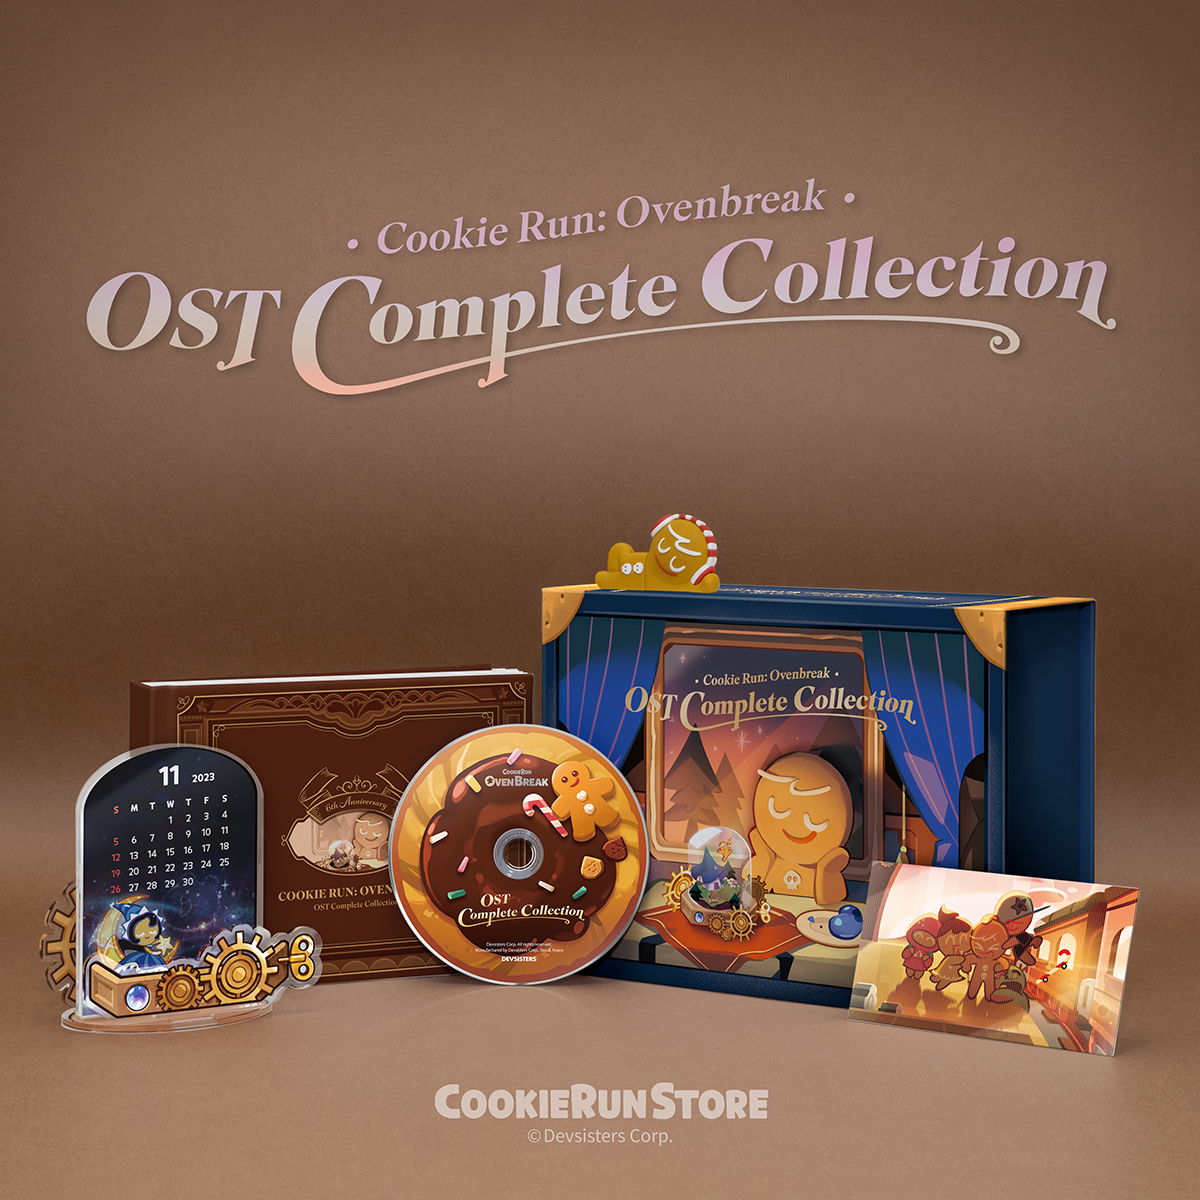 CookieRun: OvenBreak OST Complete Collection